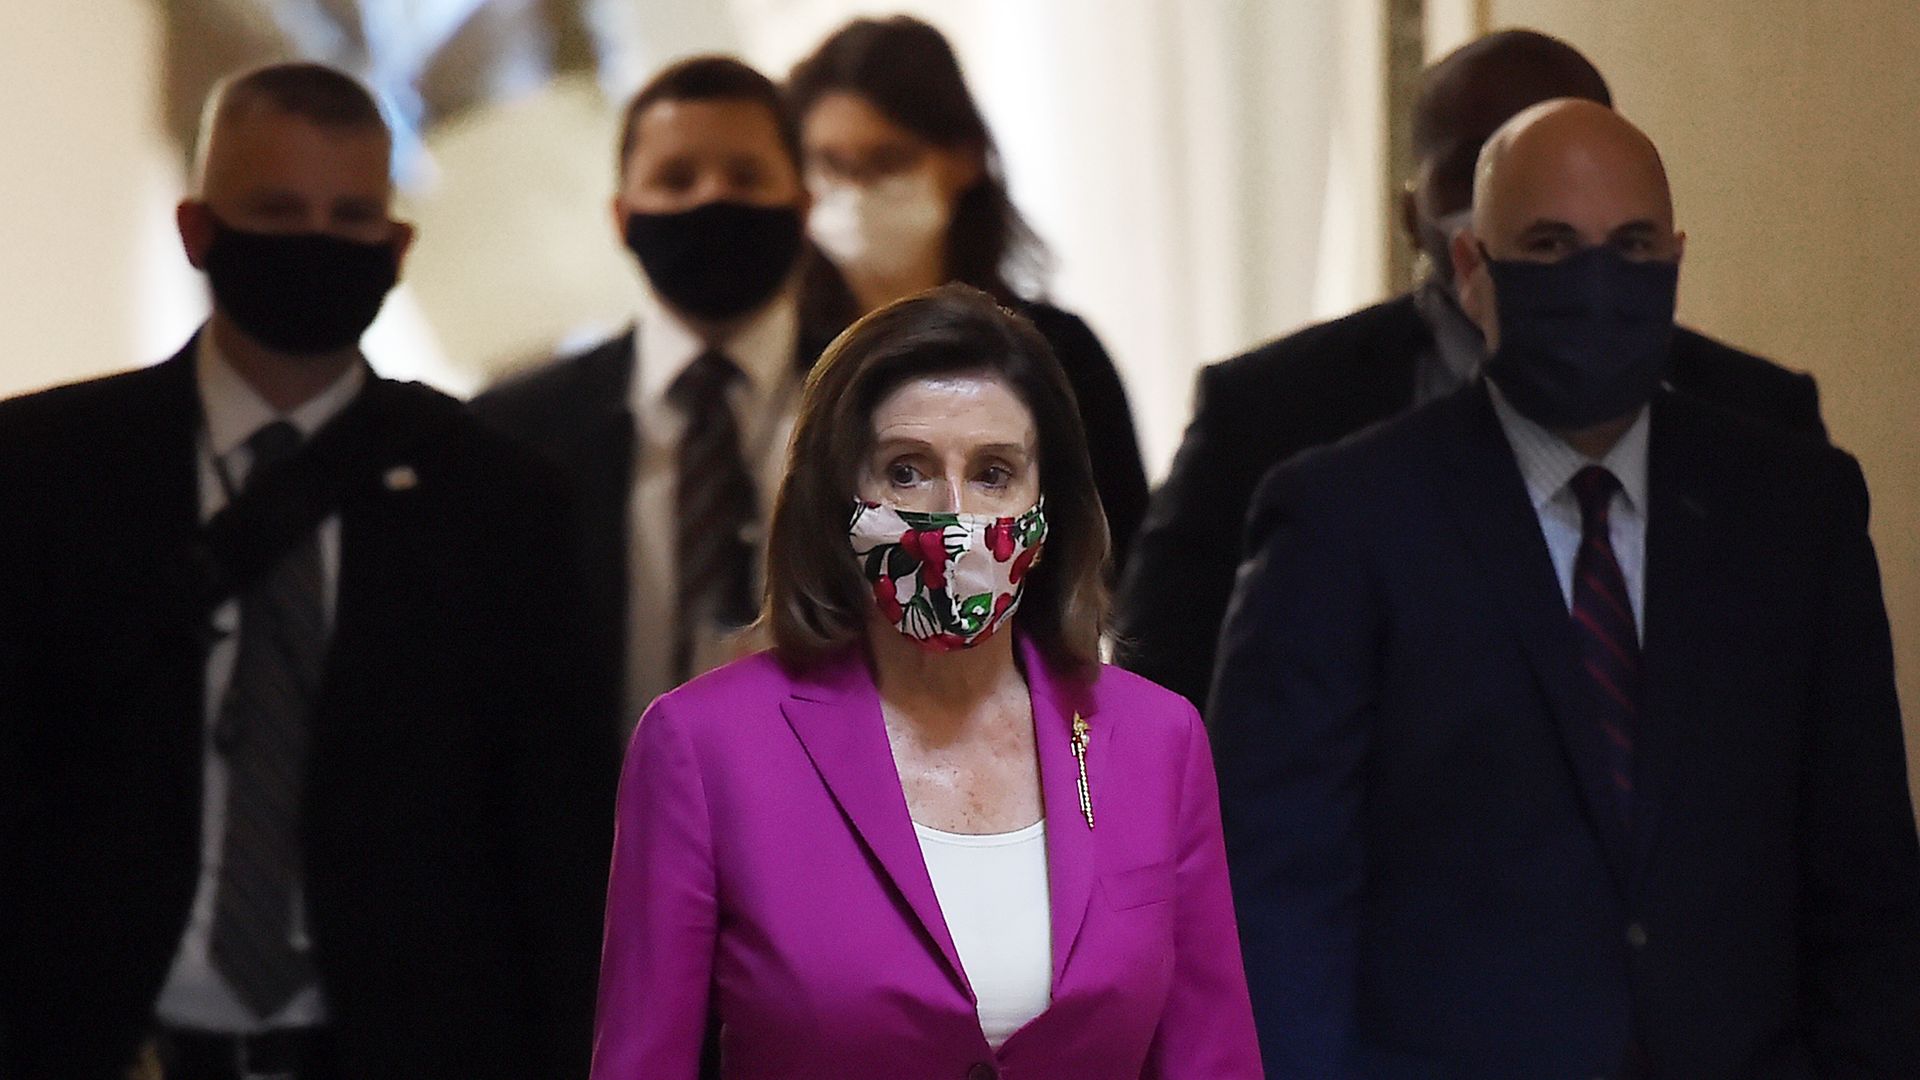 In this image, Nancy Pelosi wears a face scarf while walking ahead of men in suits wearing masks